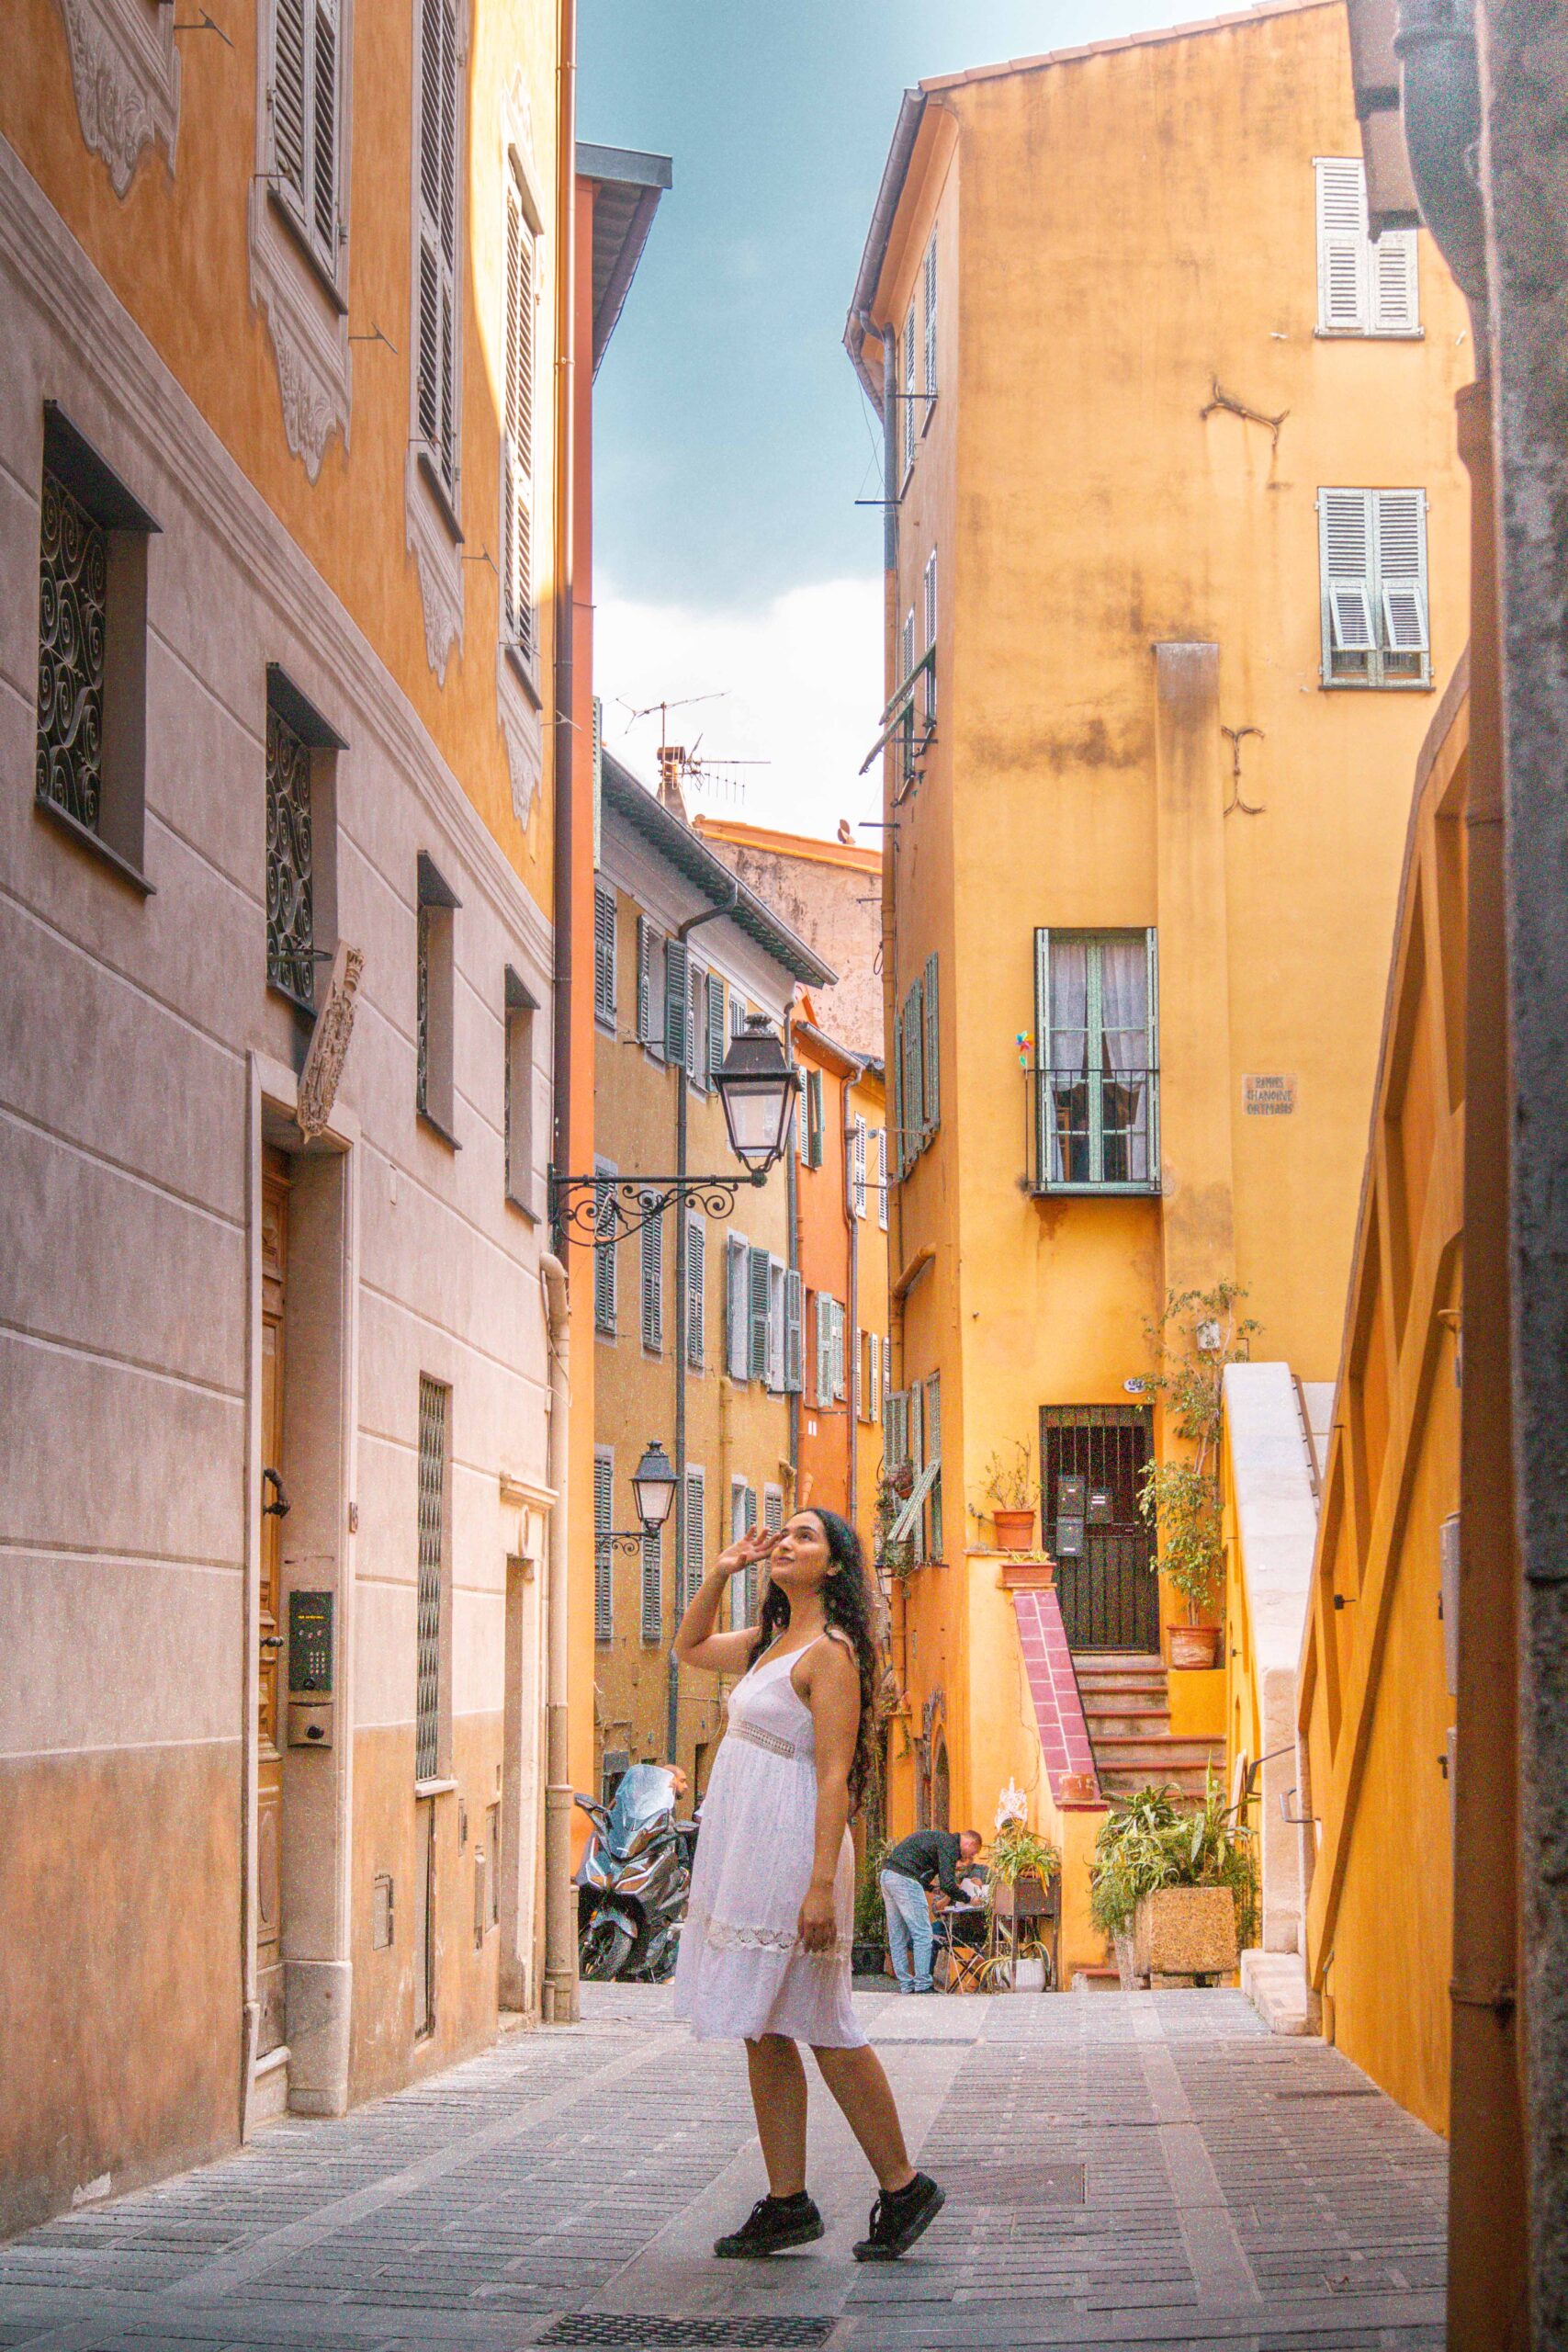 Woman wearing a white dress posing in a narrow street ("Rue Longue"), looking up at the colourful facades and windows in the Old Town of Menton, France